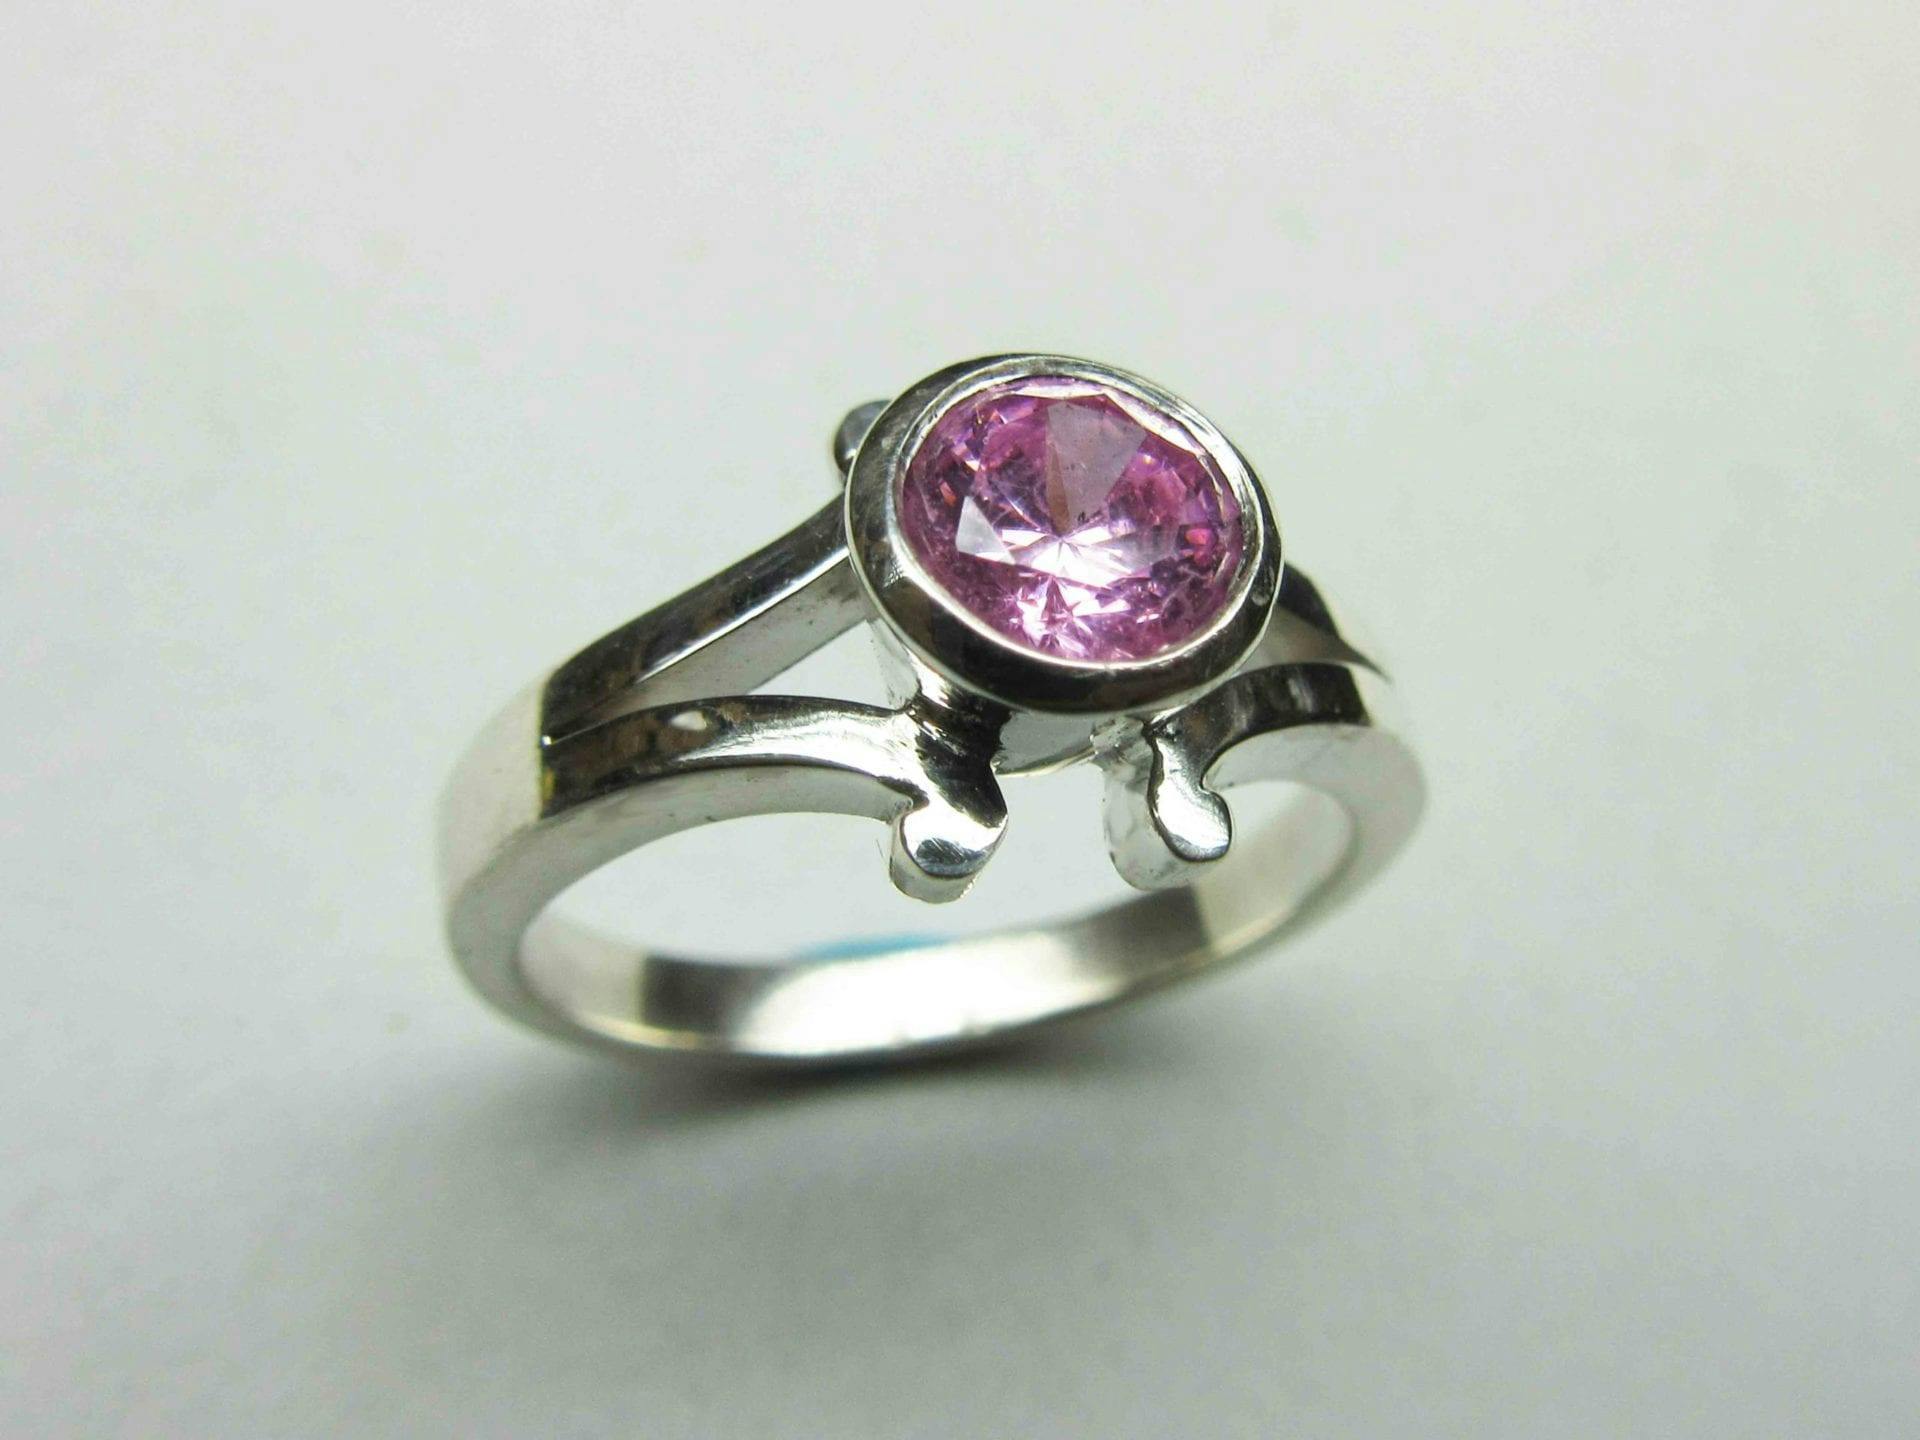 How to Make a Bezel Set Scroll Ring